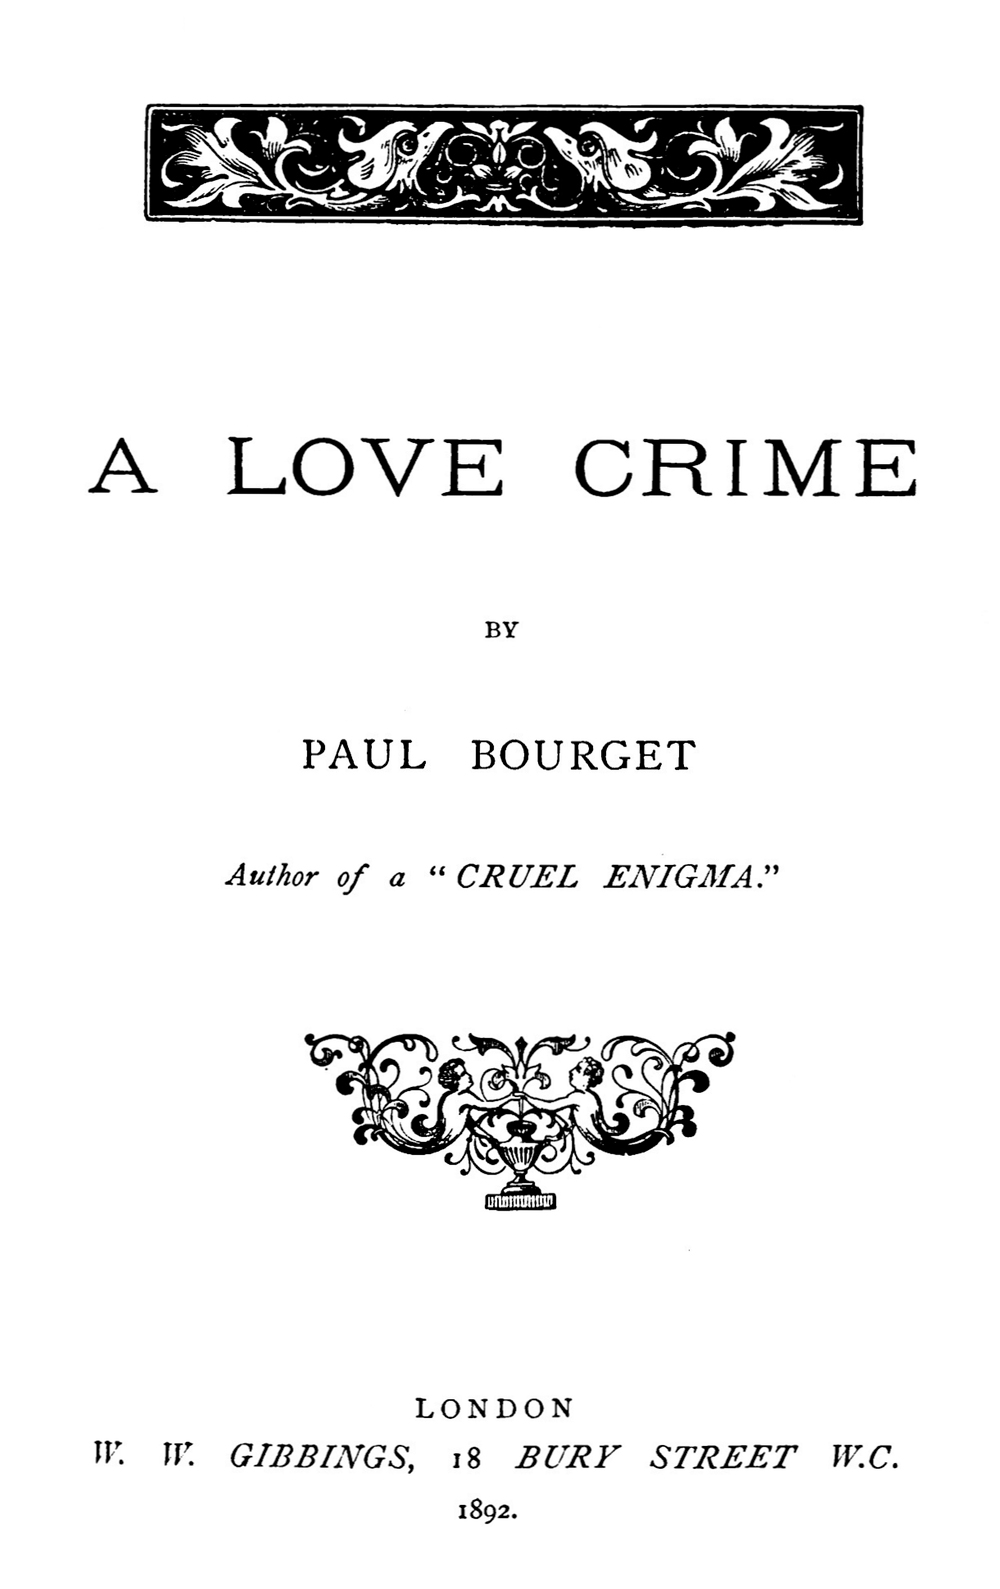 The Project Gutenberg eBook of A Love Crime, by Paul Bourget. pic